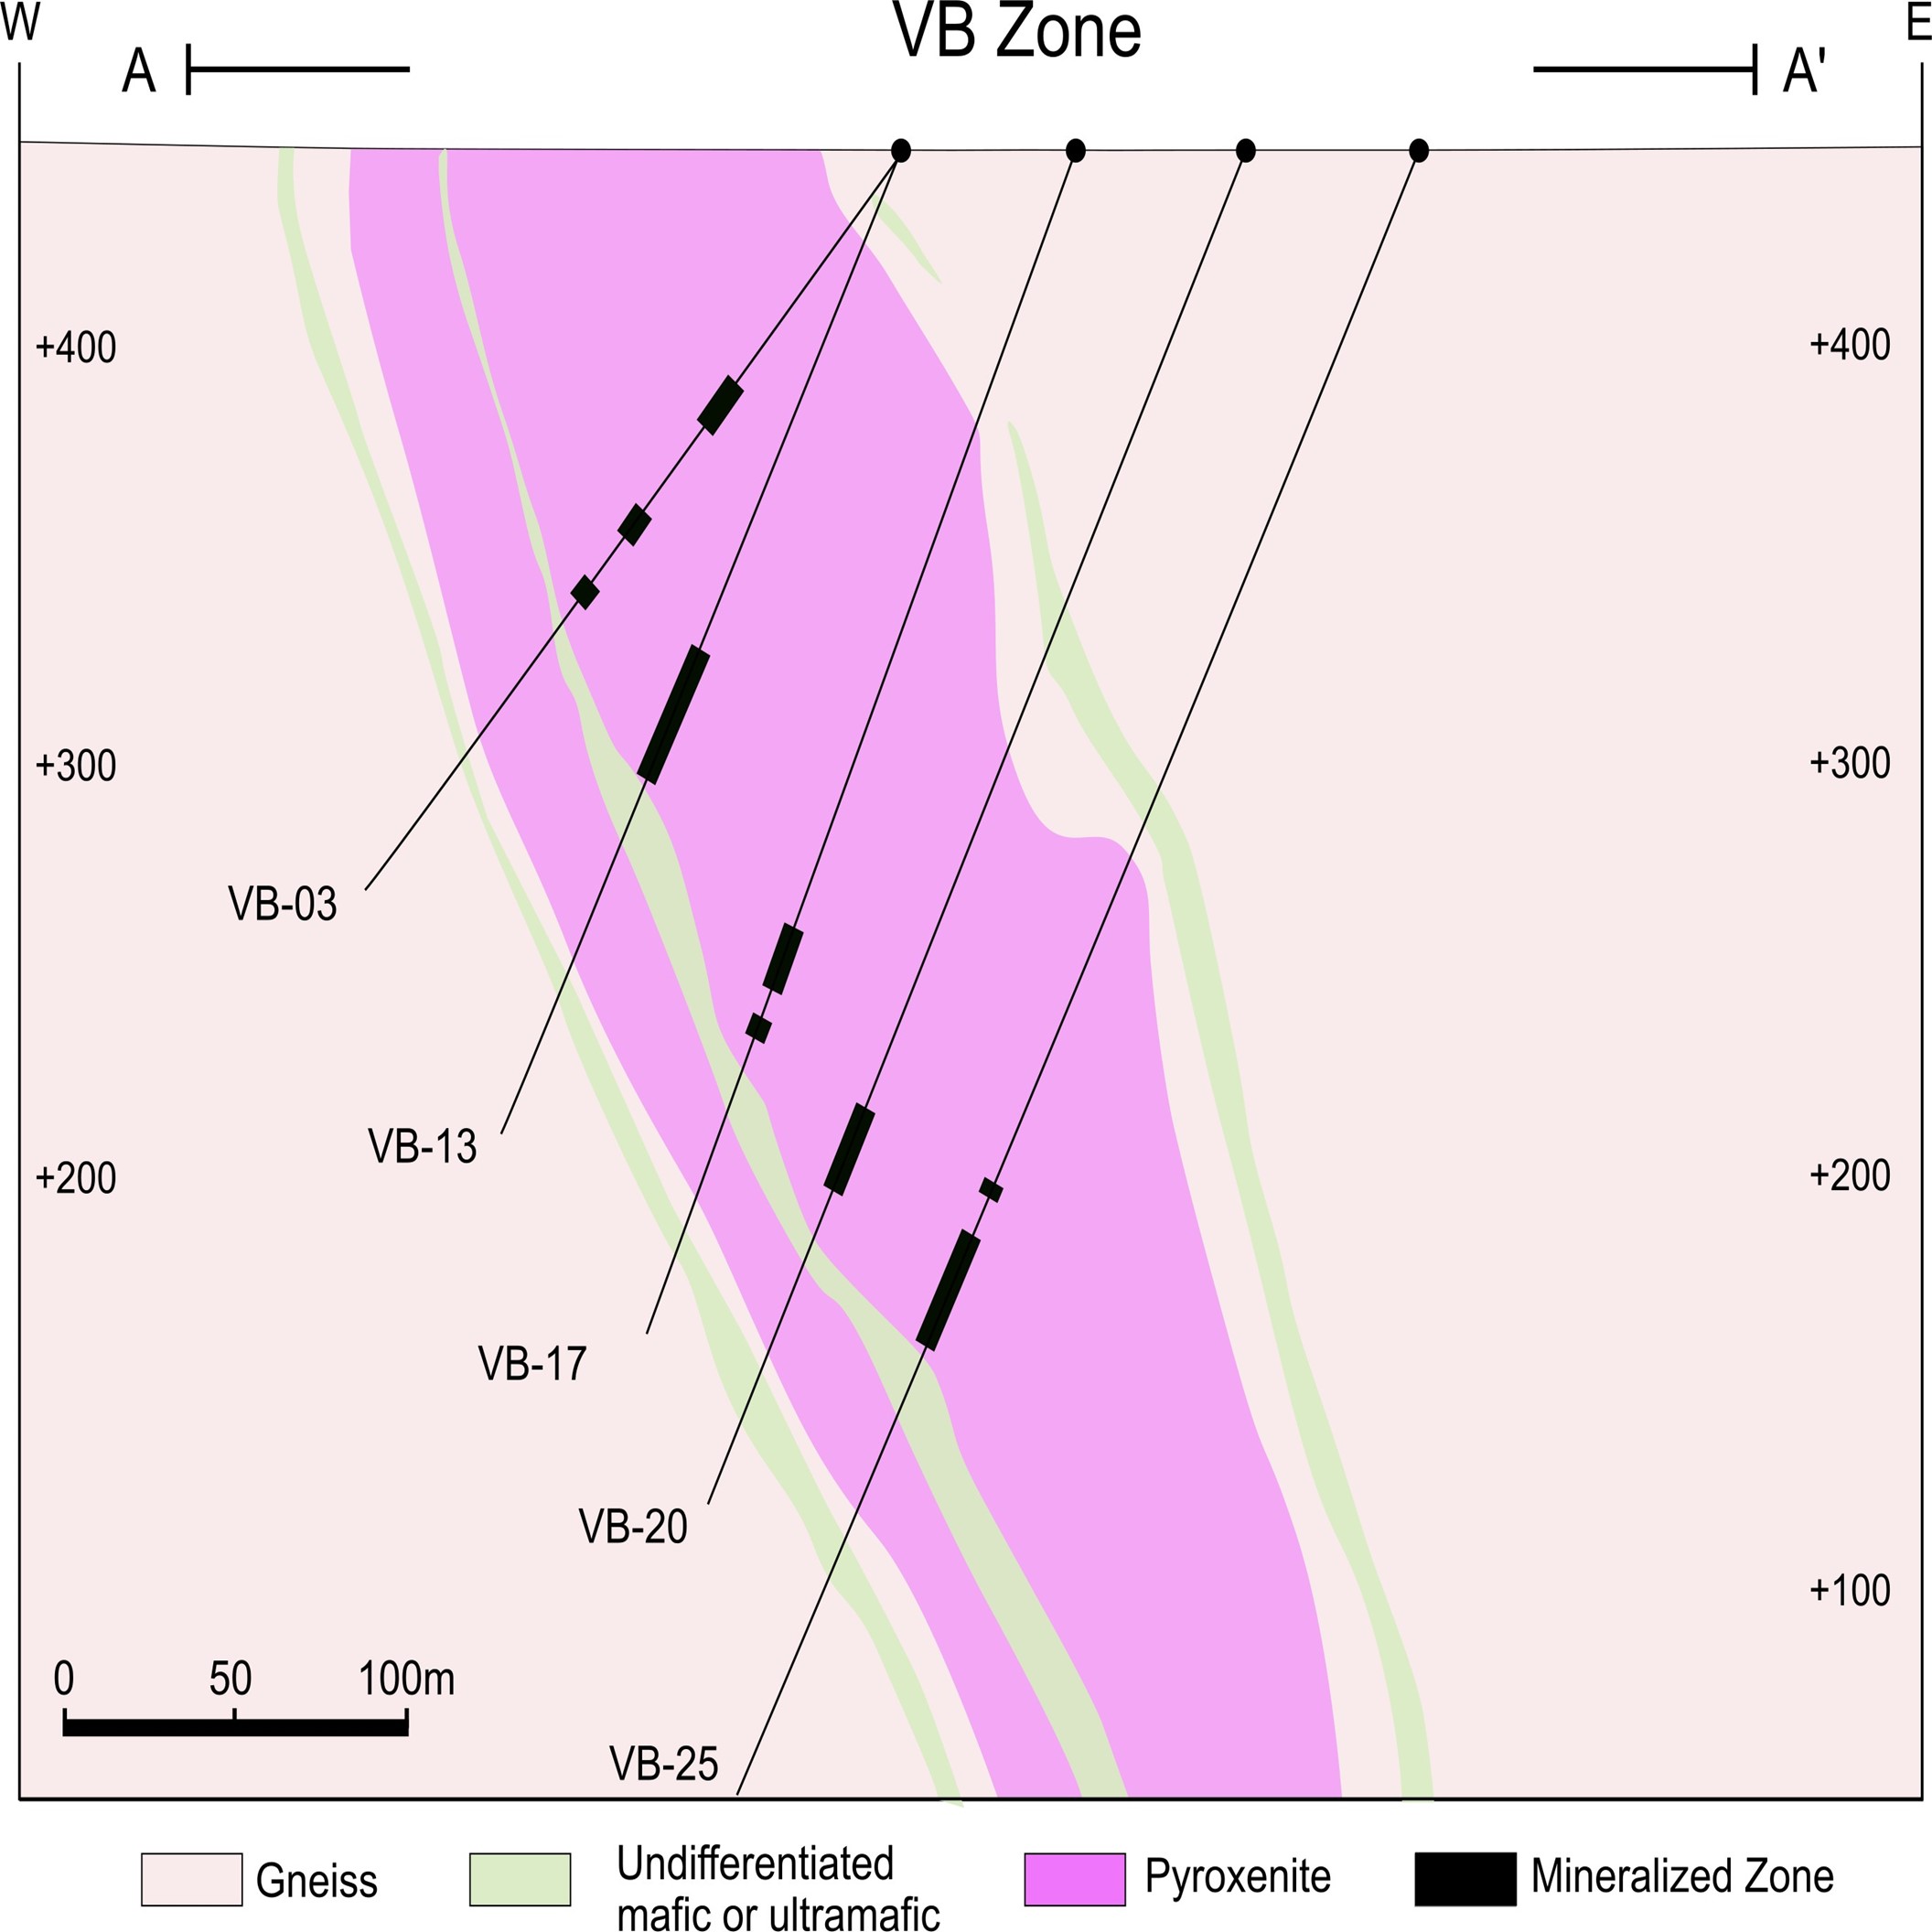 VB Zone - East-West Composite Section